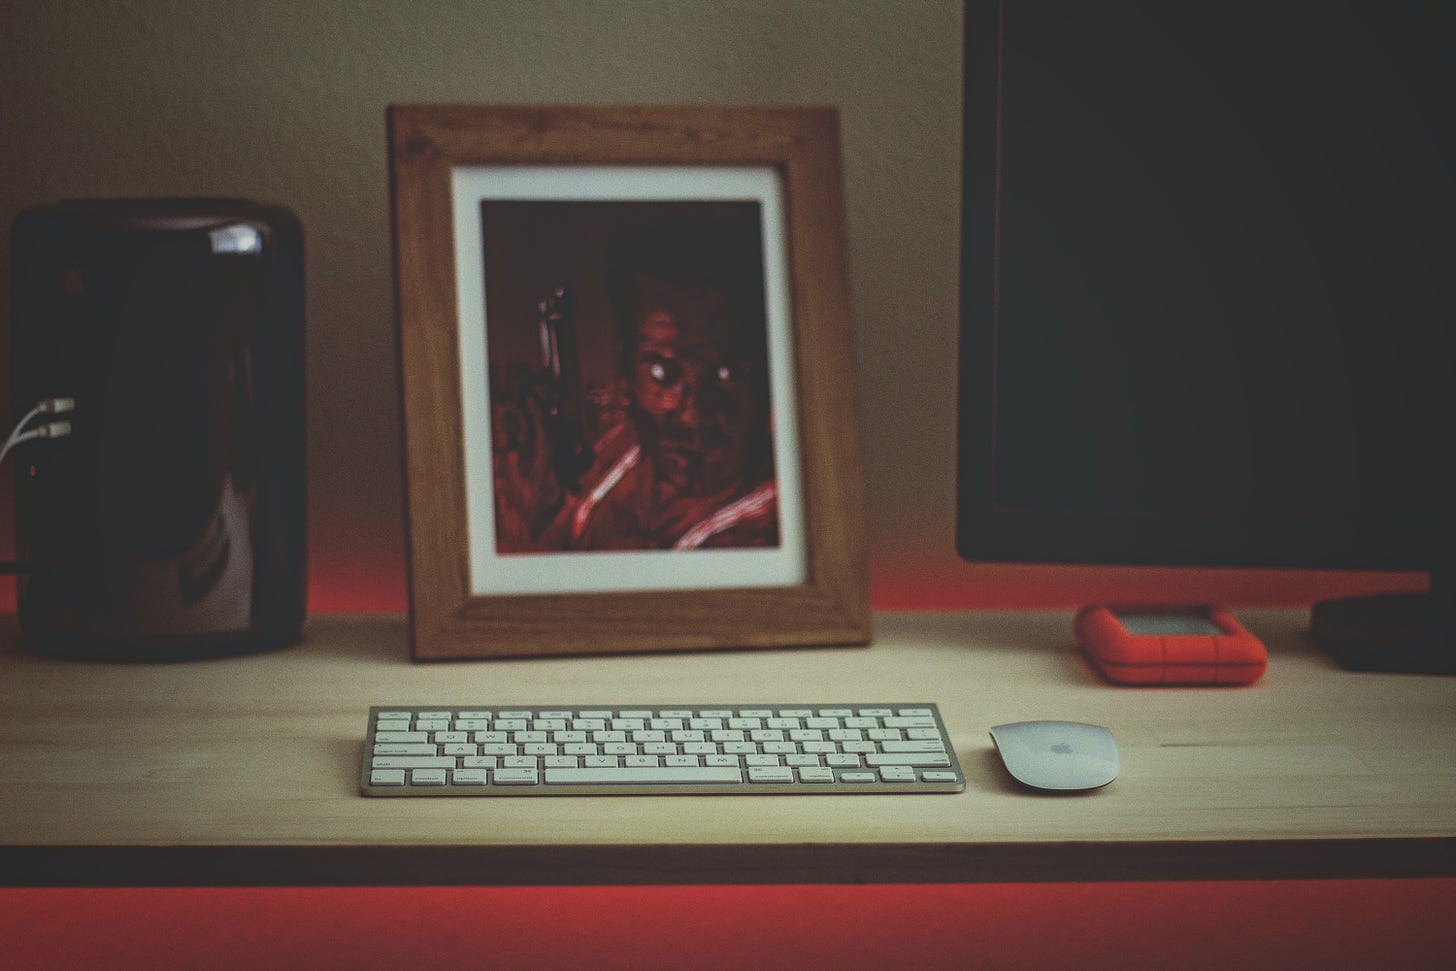 A framed picture of John McClane in Die Hard, next to a computer monitor and behind an Apple keyboard and mouse